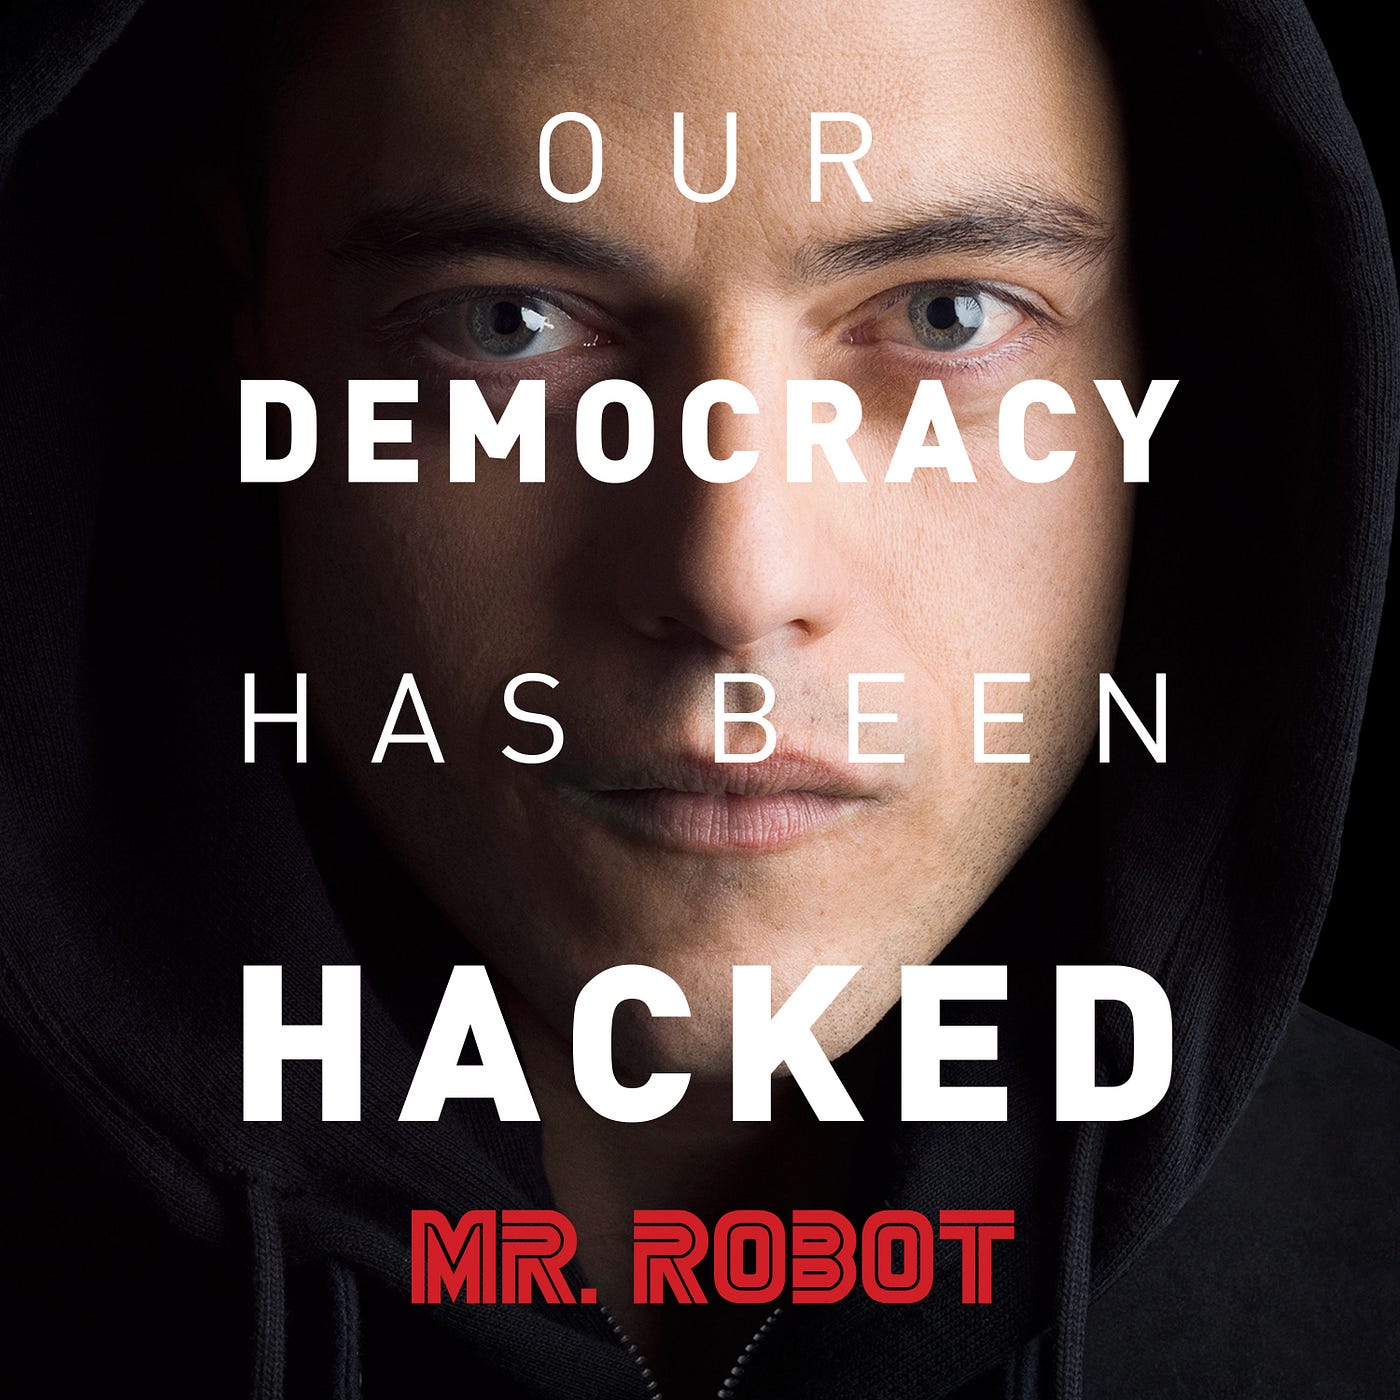 5 Reasons To Watch Mr. Robot. Analyzing the show in 2022